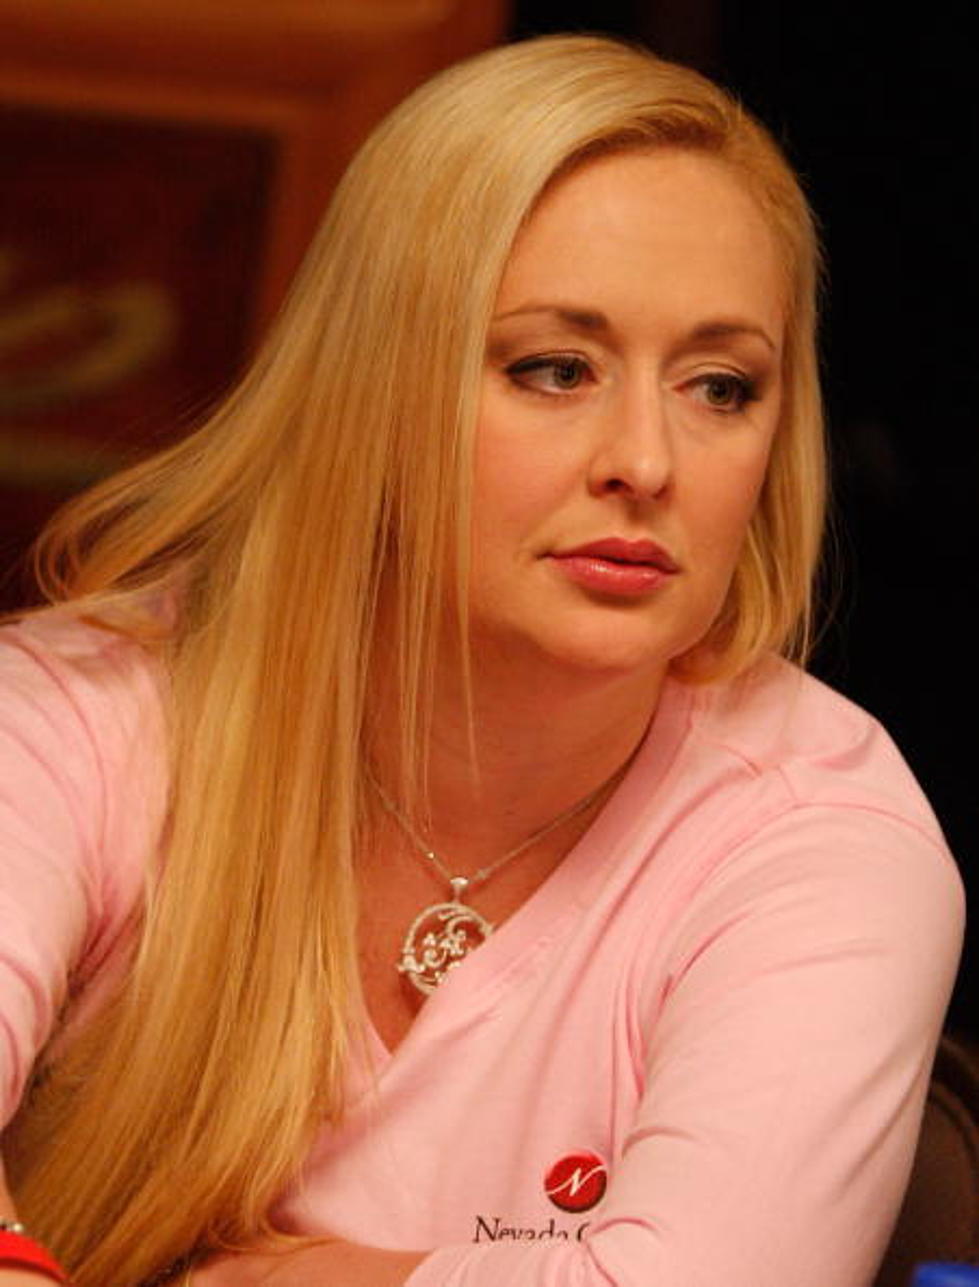 Mindy McCready Has Died of Apparent Suicide